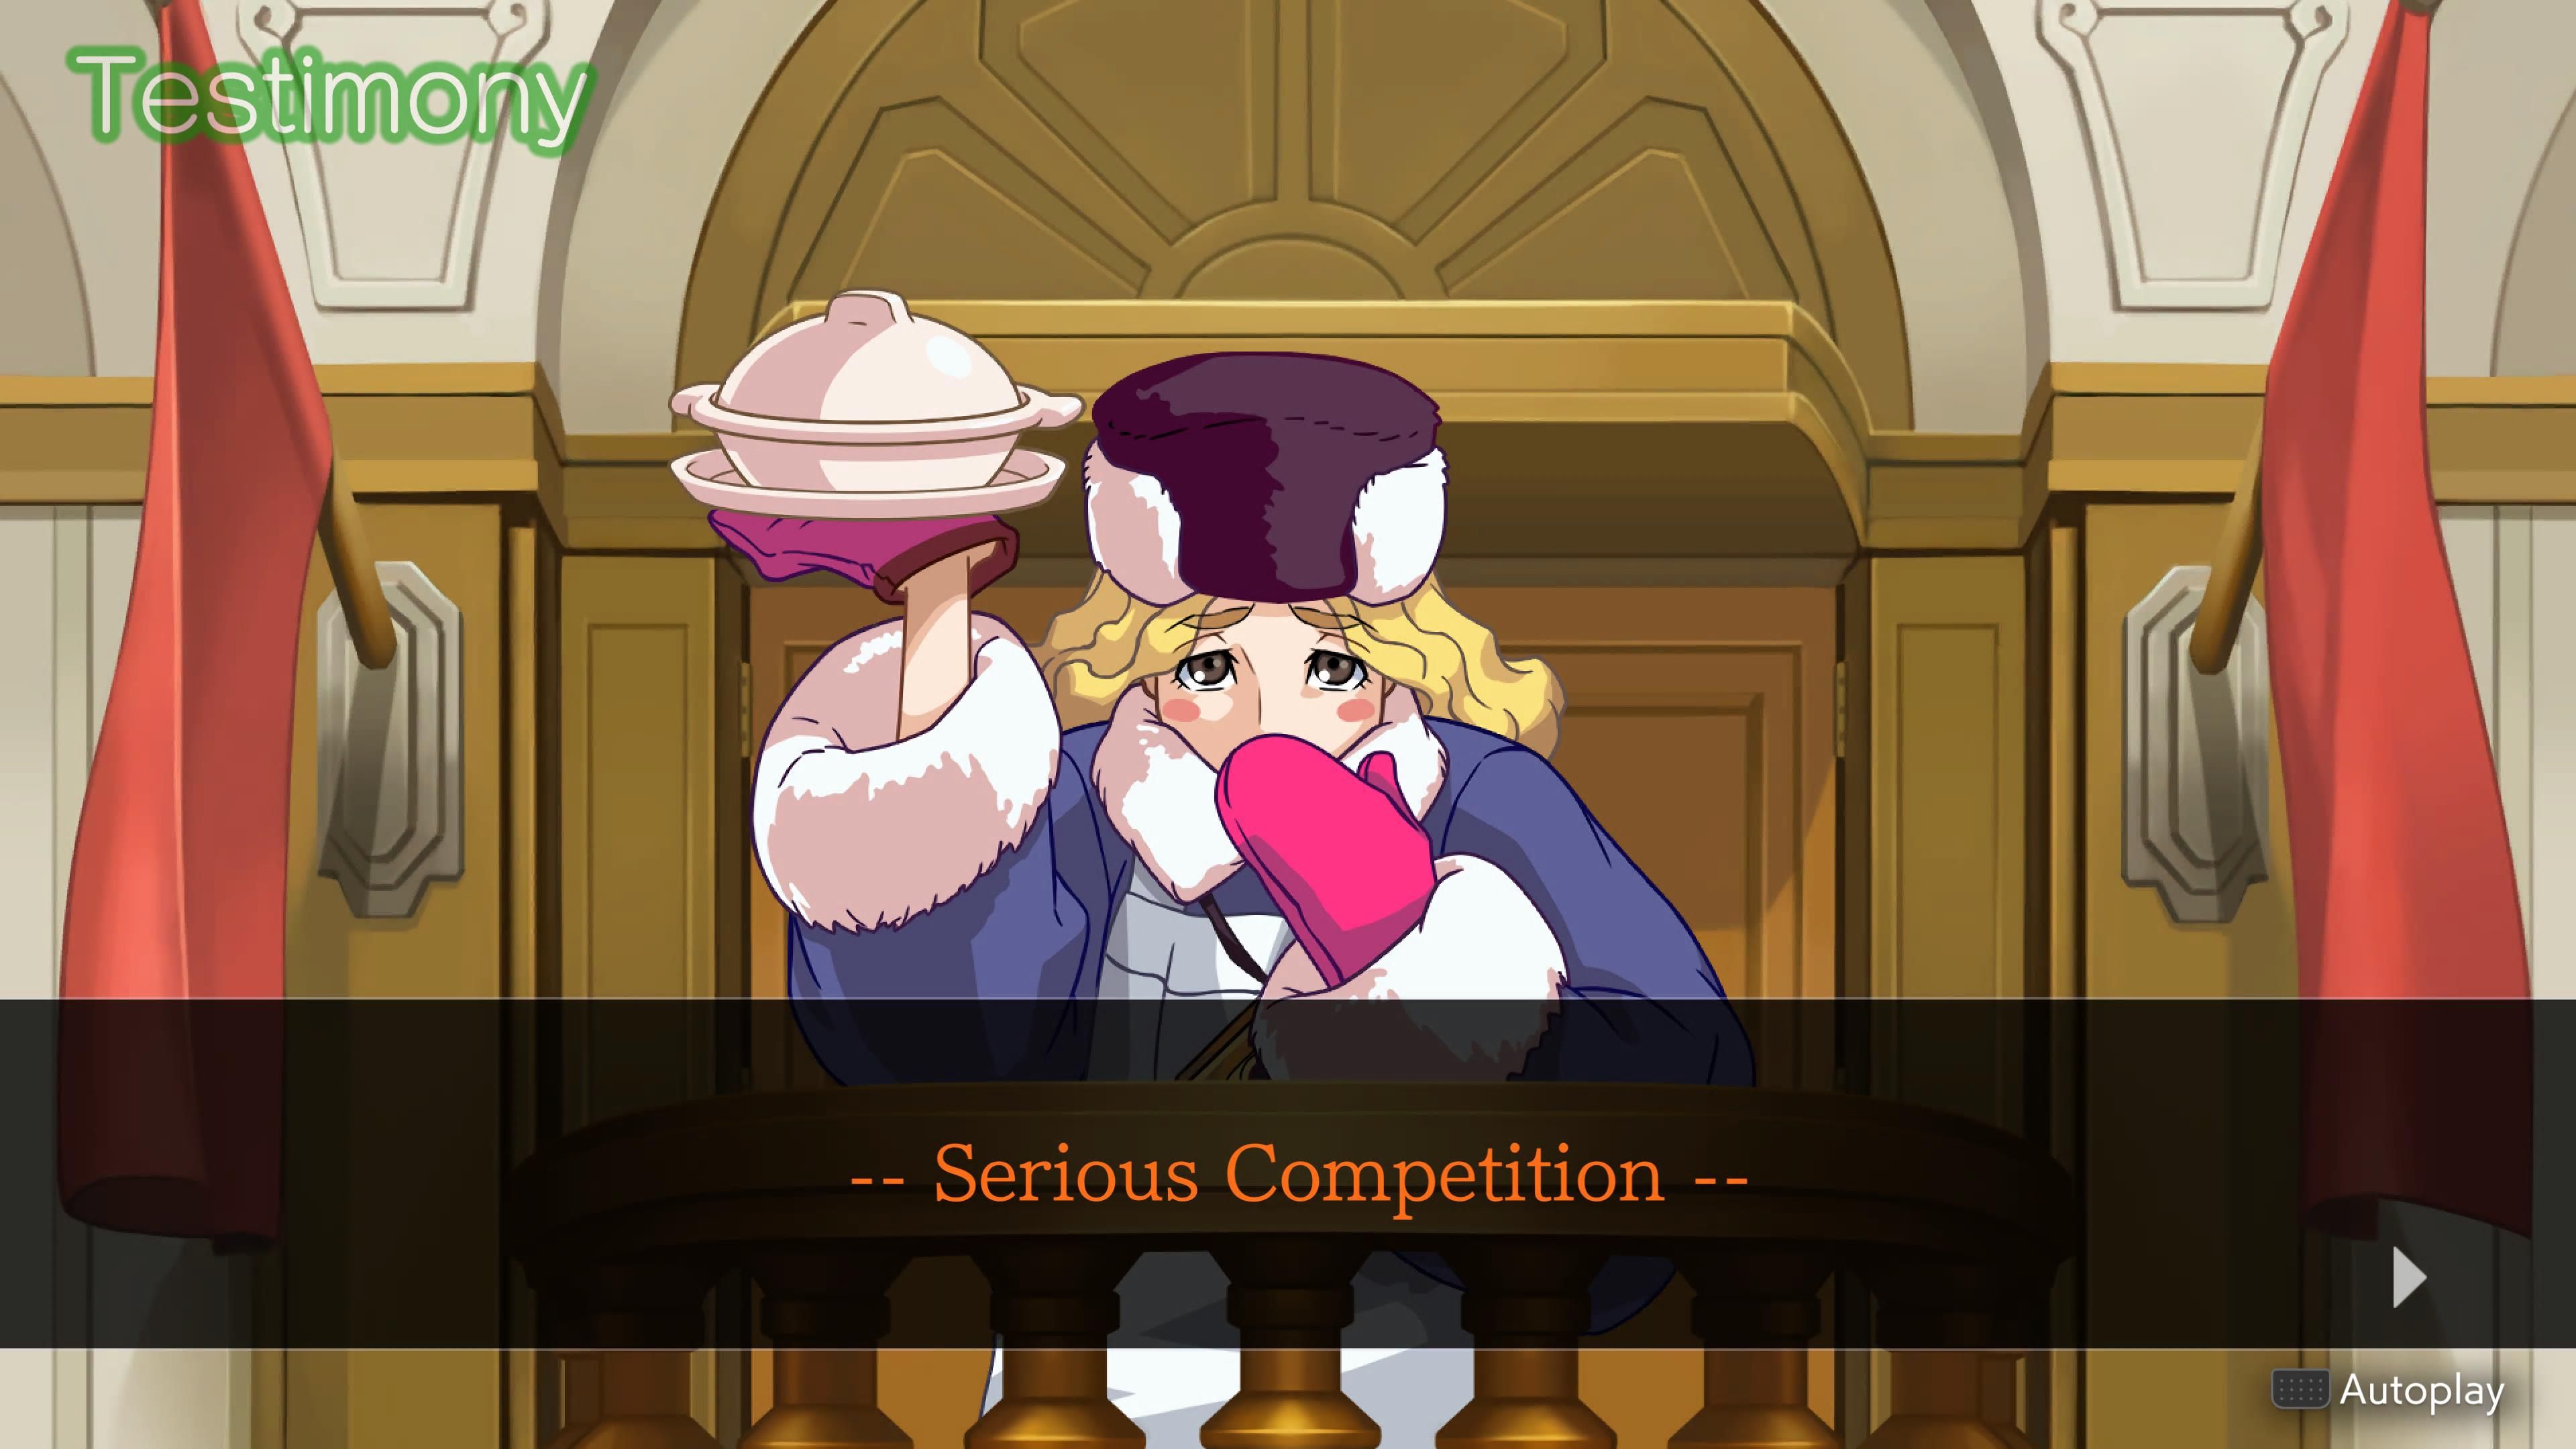 Cross examining Olga Orly in Ace Attorney Apollo Justice about the Serious Competition